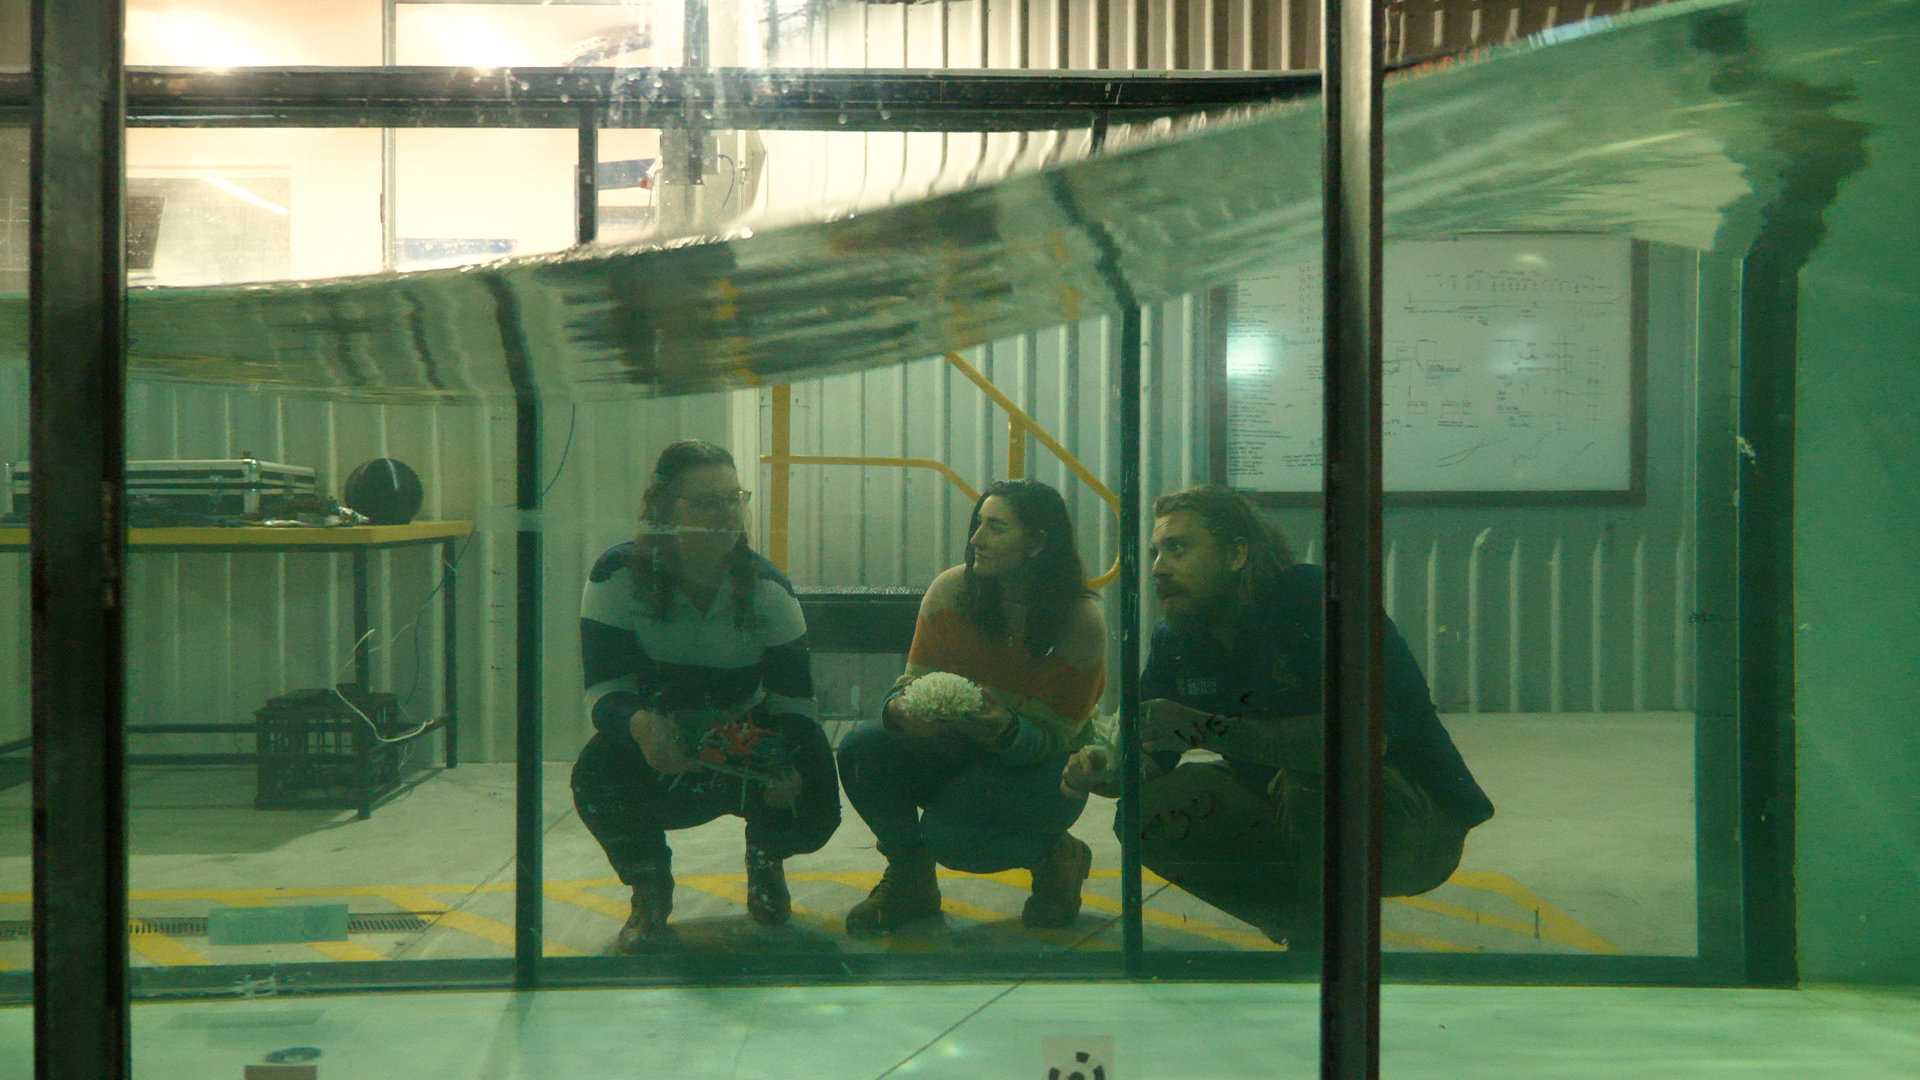 Master of Ocean Leadership students and graduate discussion wave movement in the wave flume located at the the Coastal and Offshore Engineering Lab. From left to right: Louise Richardson, Careena Nolan, Jurgen Valckenaere.